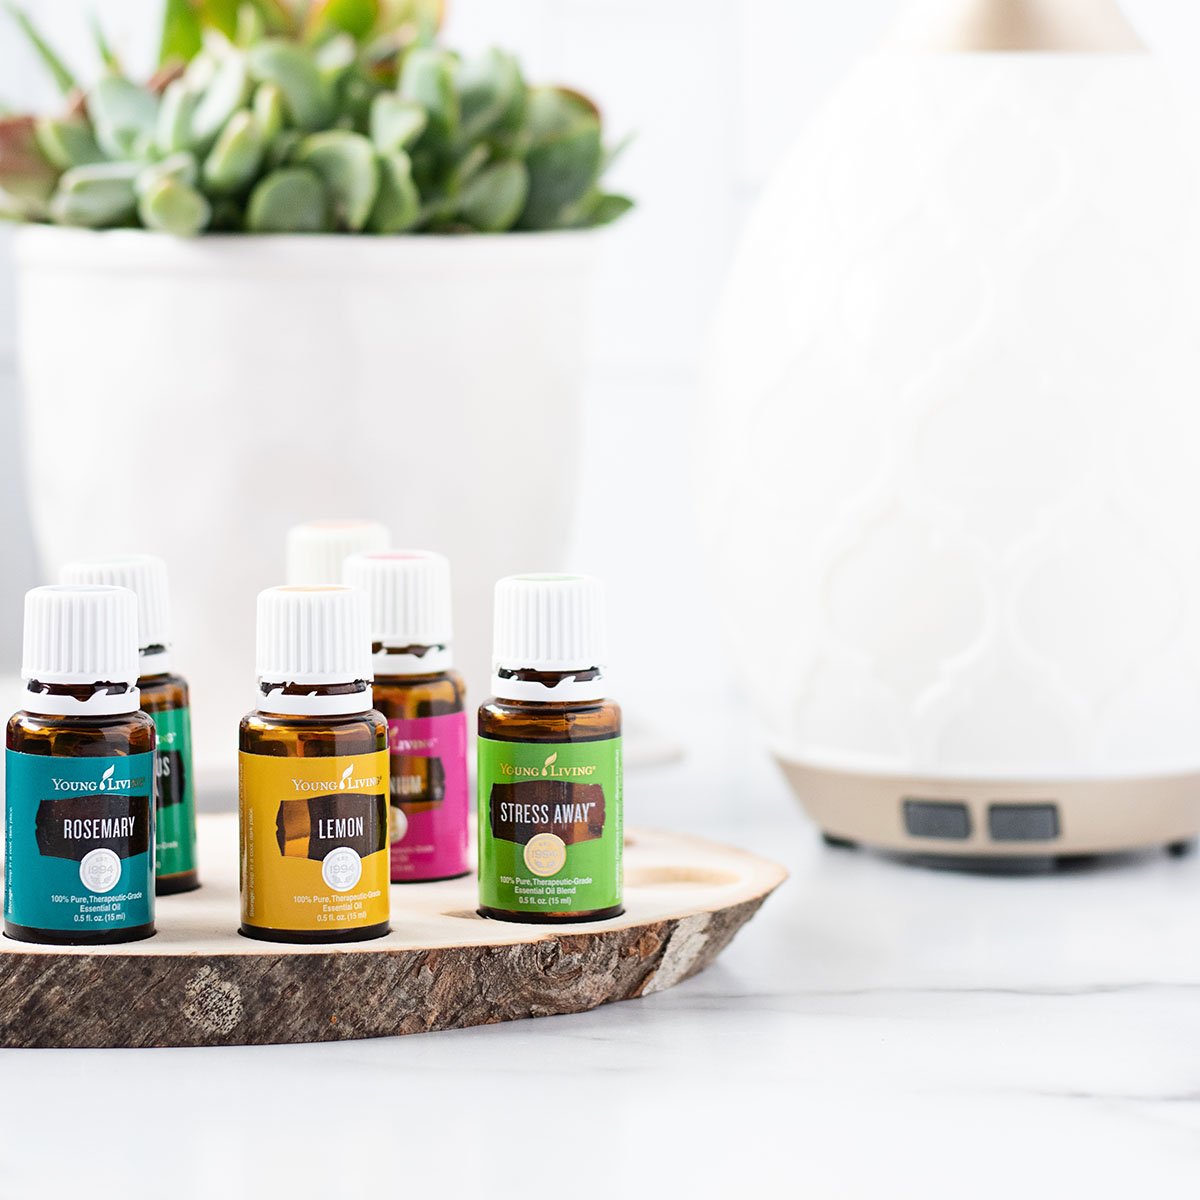 We’ve got the best spring essential oil blends recipes for diffusers, room sprays, essential oil perfume and more!